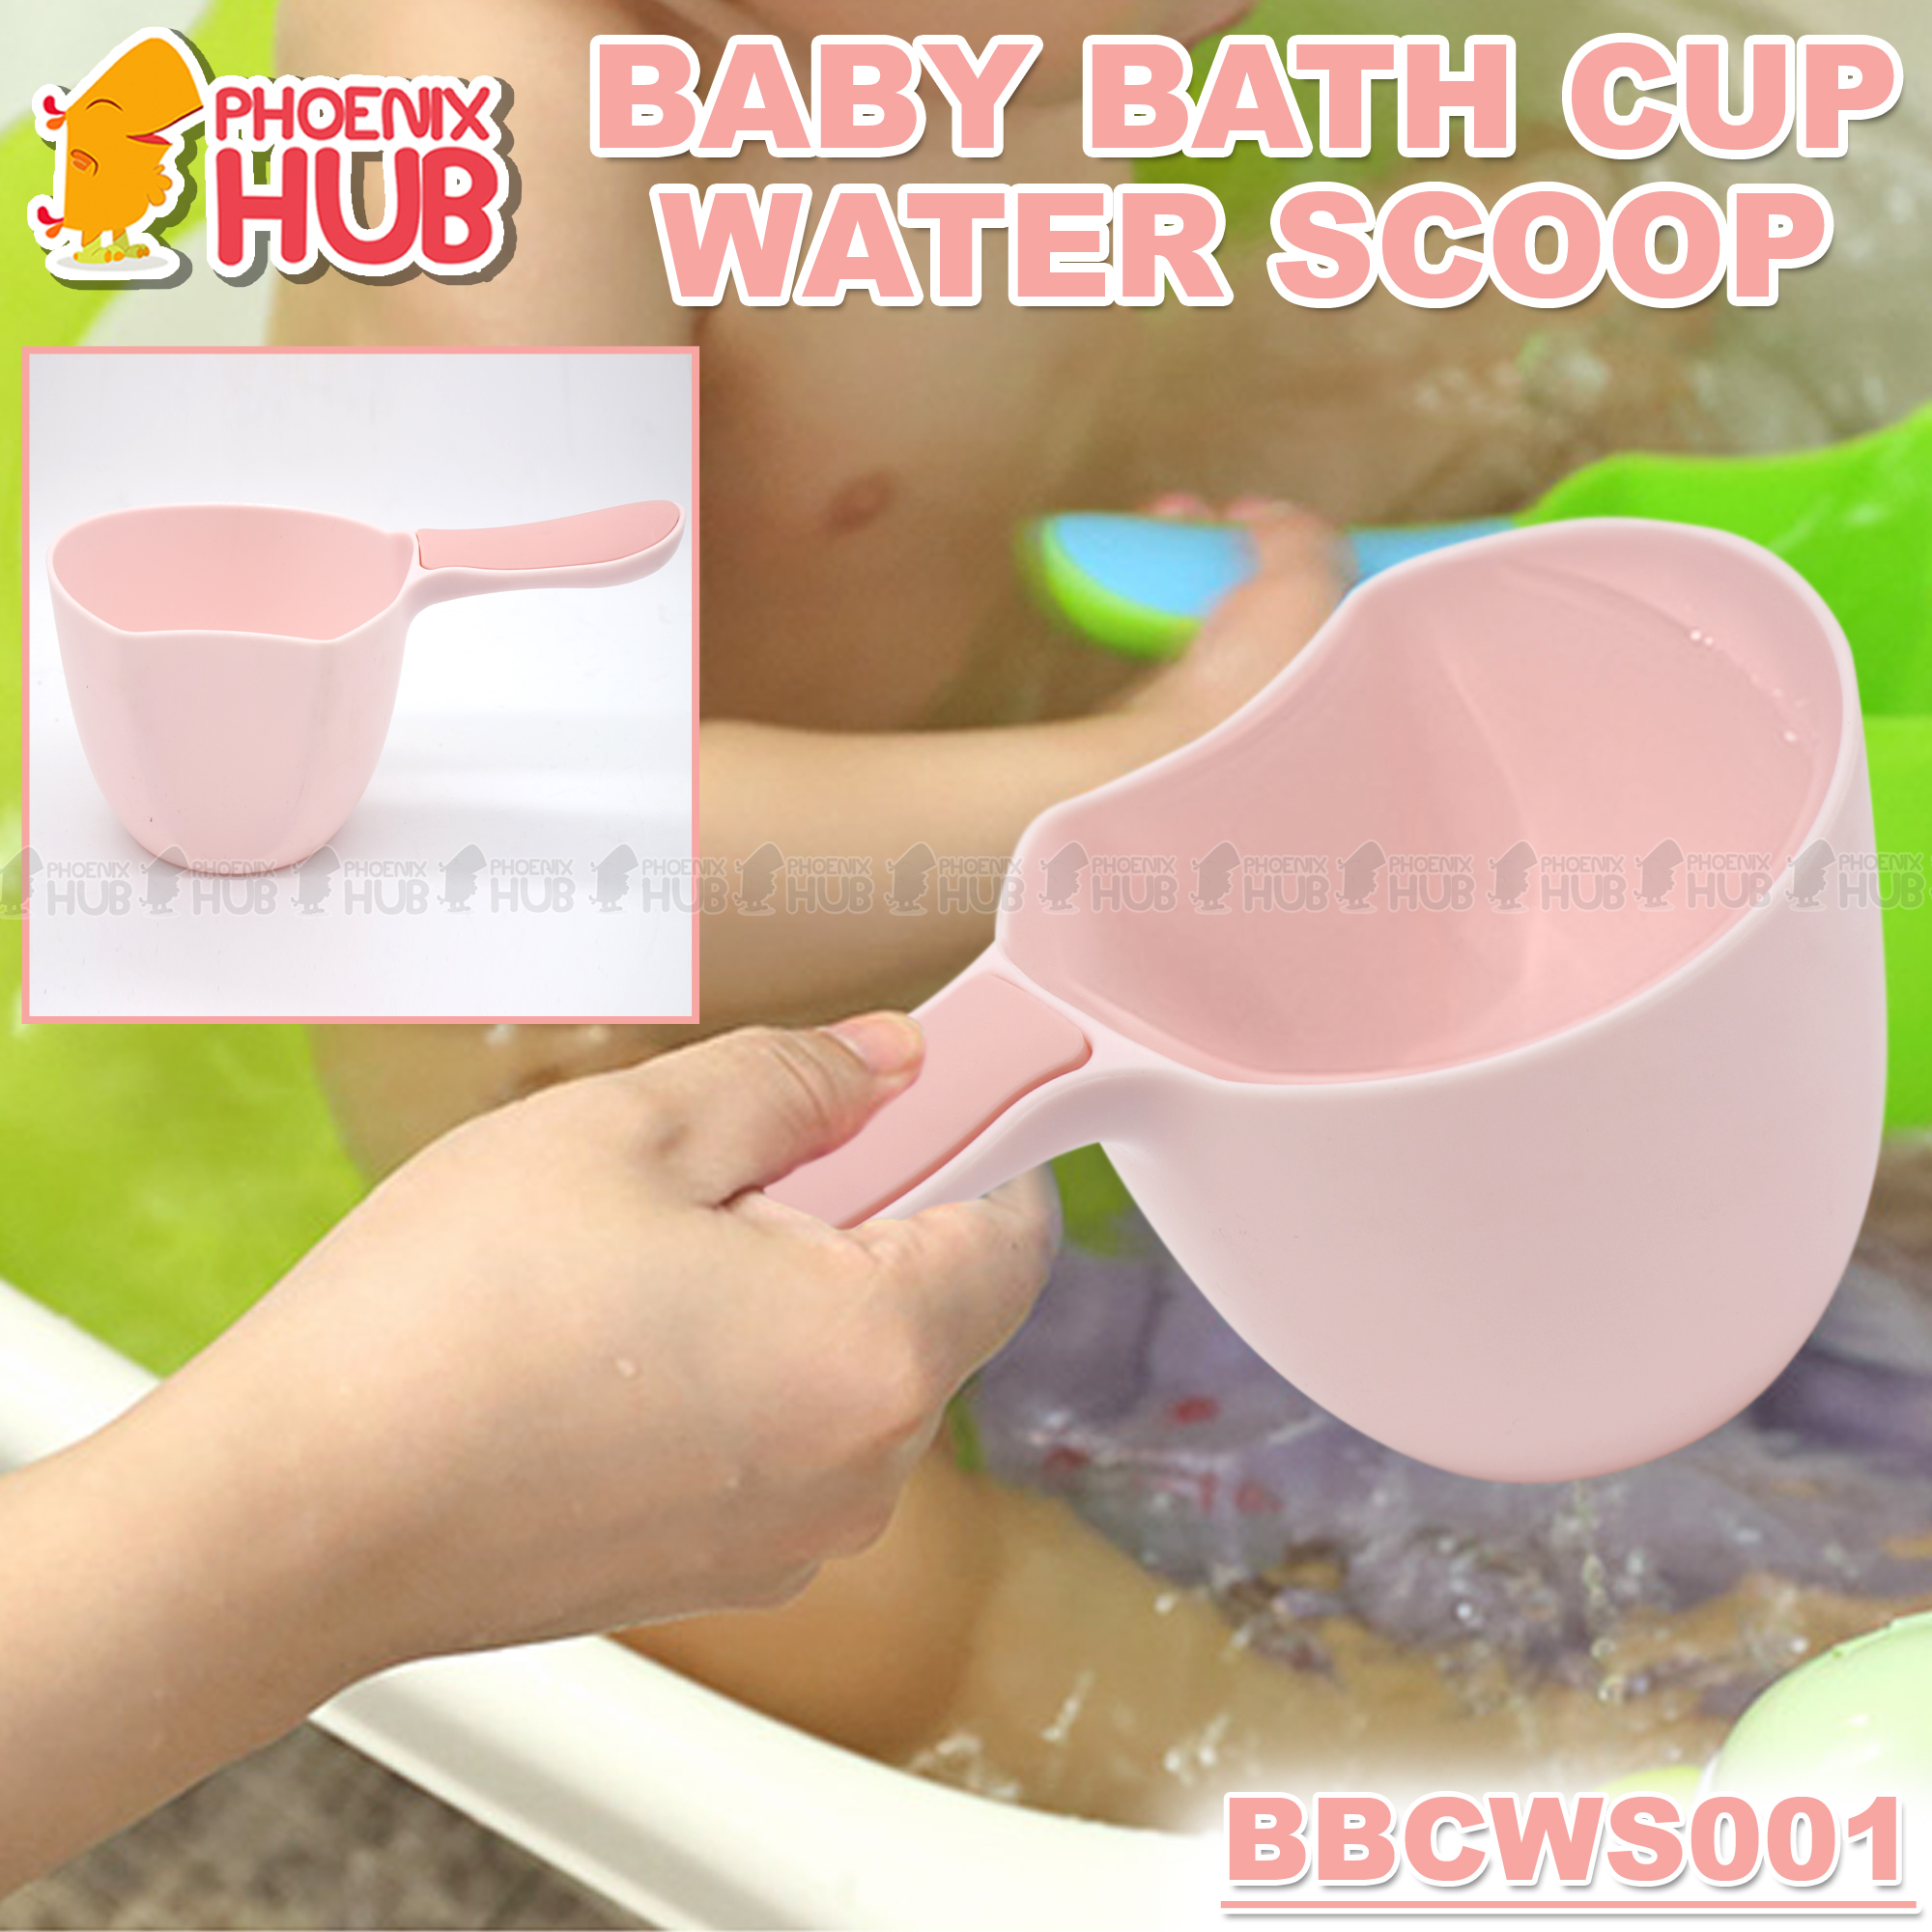 DikDok Reliable Plastic Bathing Ladle Spoons Bathroom Water Scoop Cup Baby Shampoo Bath Spoon tabo Filipino Kitchen Accessories Water Dipper None BL Bl 